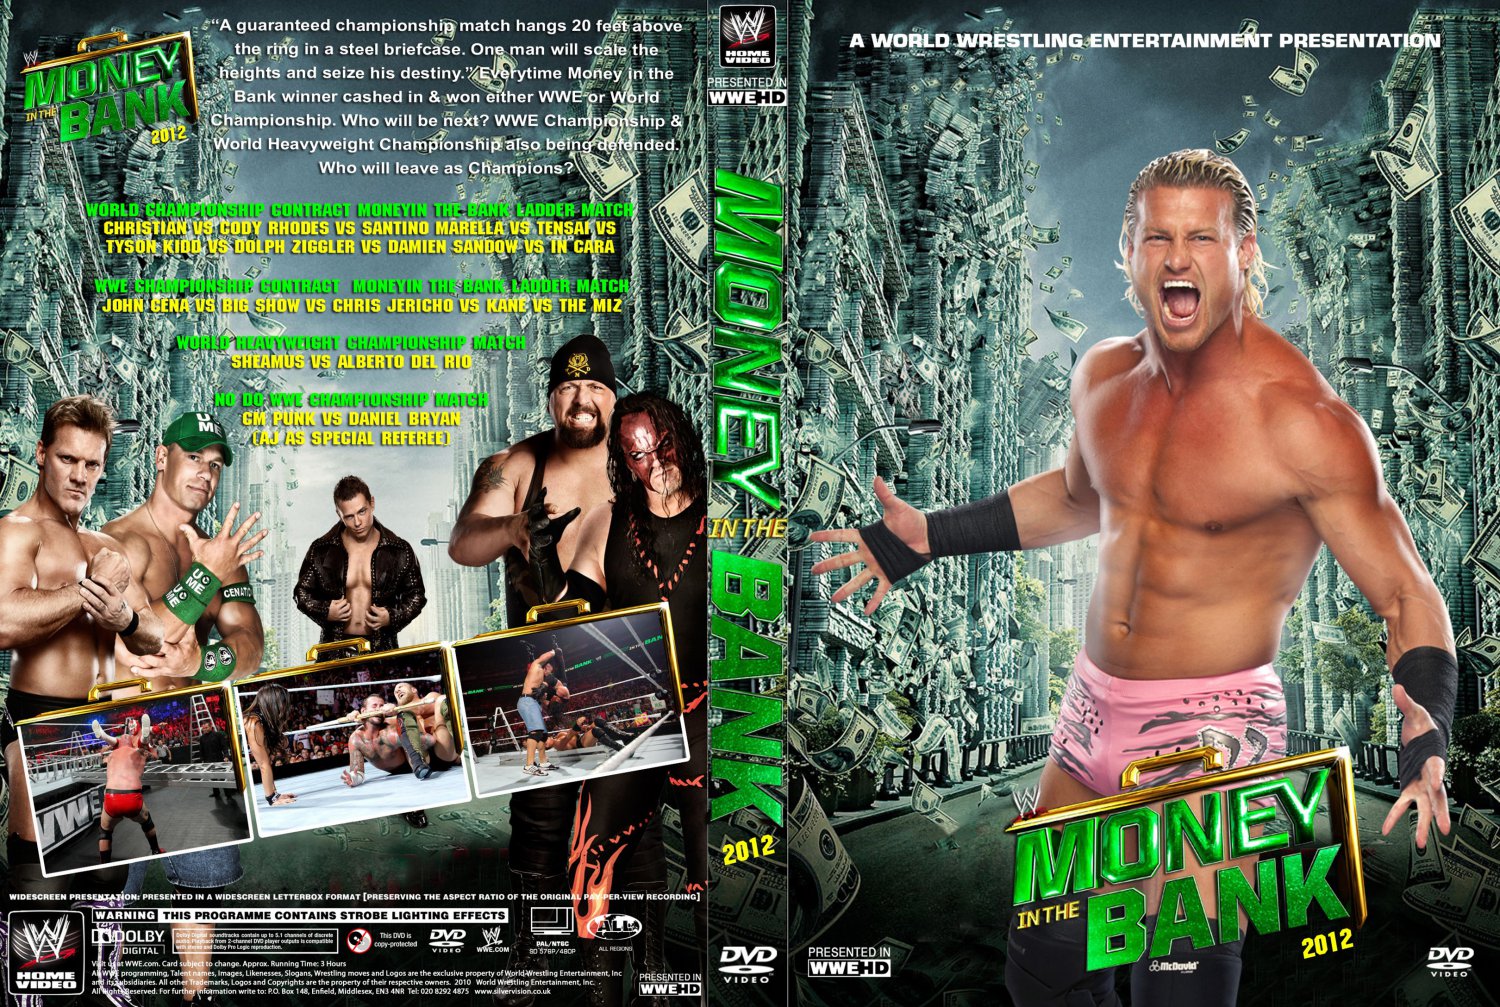 WWE Money In The Bank TV DVD Custom Covers WWE Money In The Bank